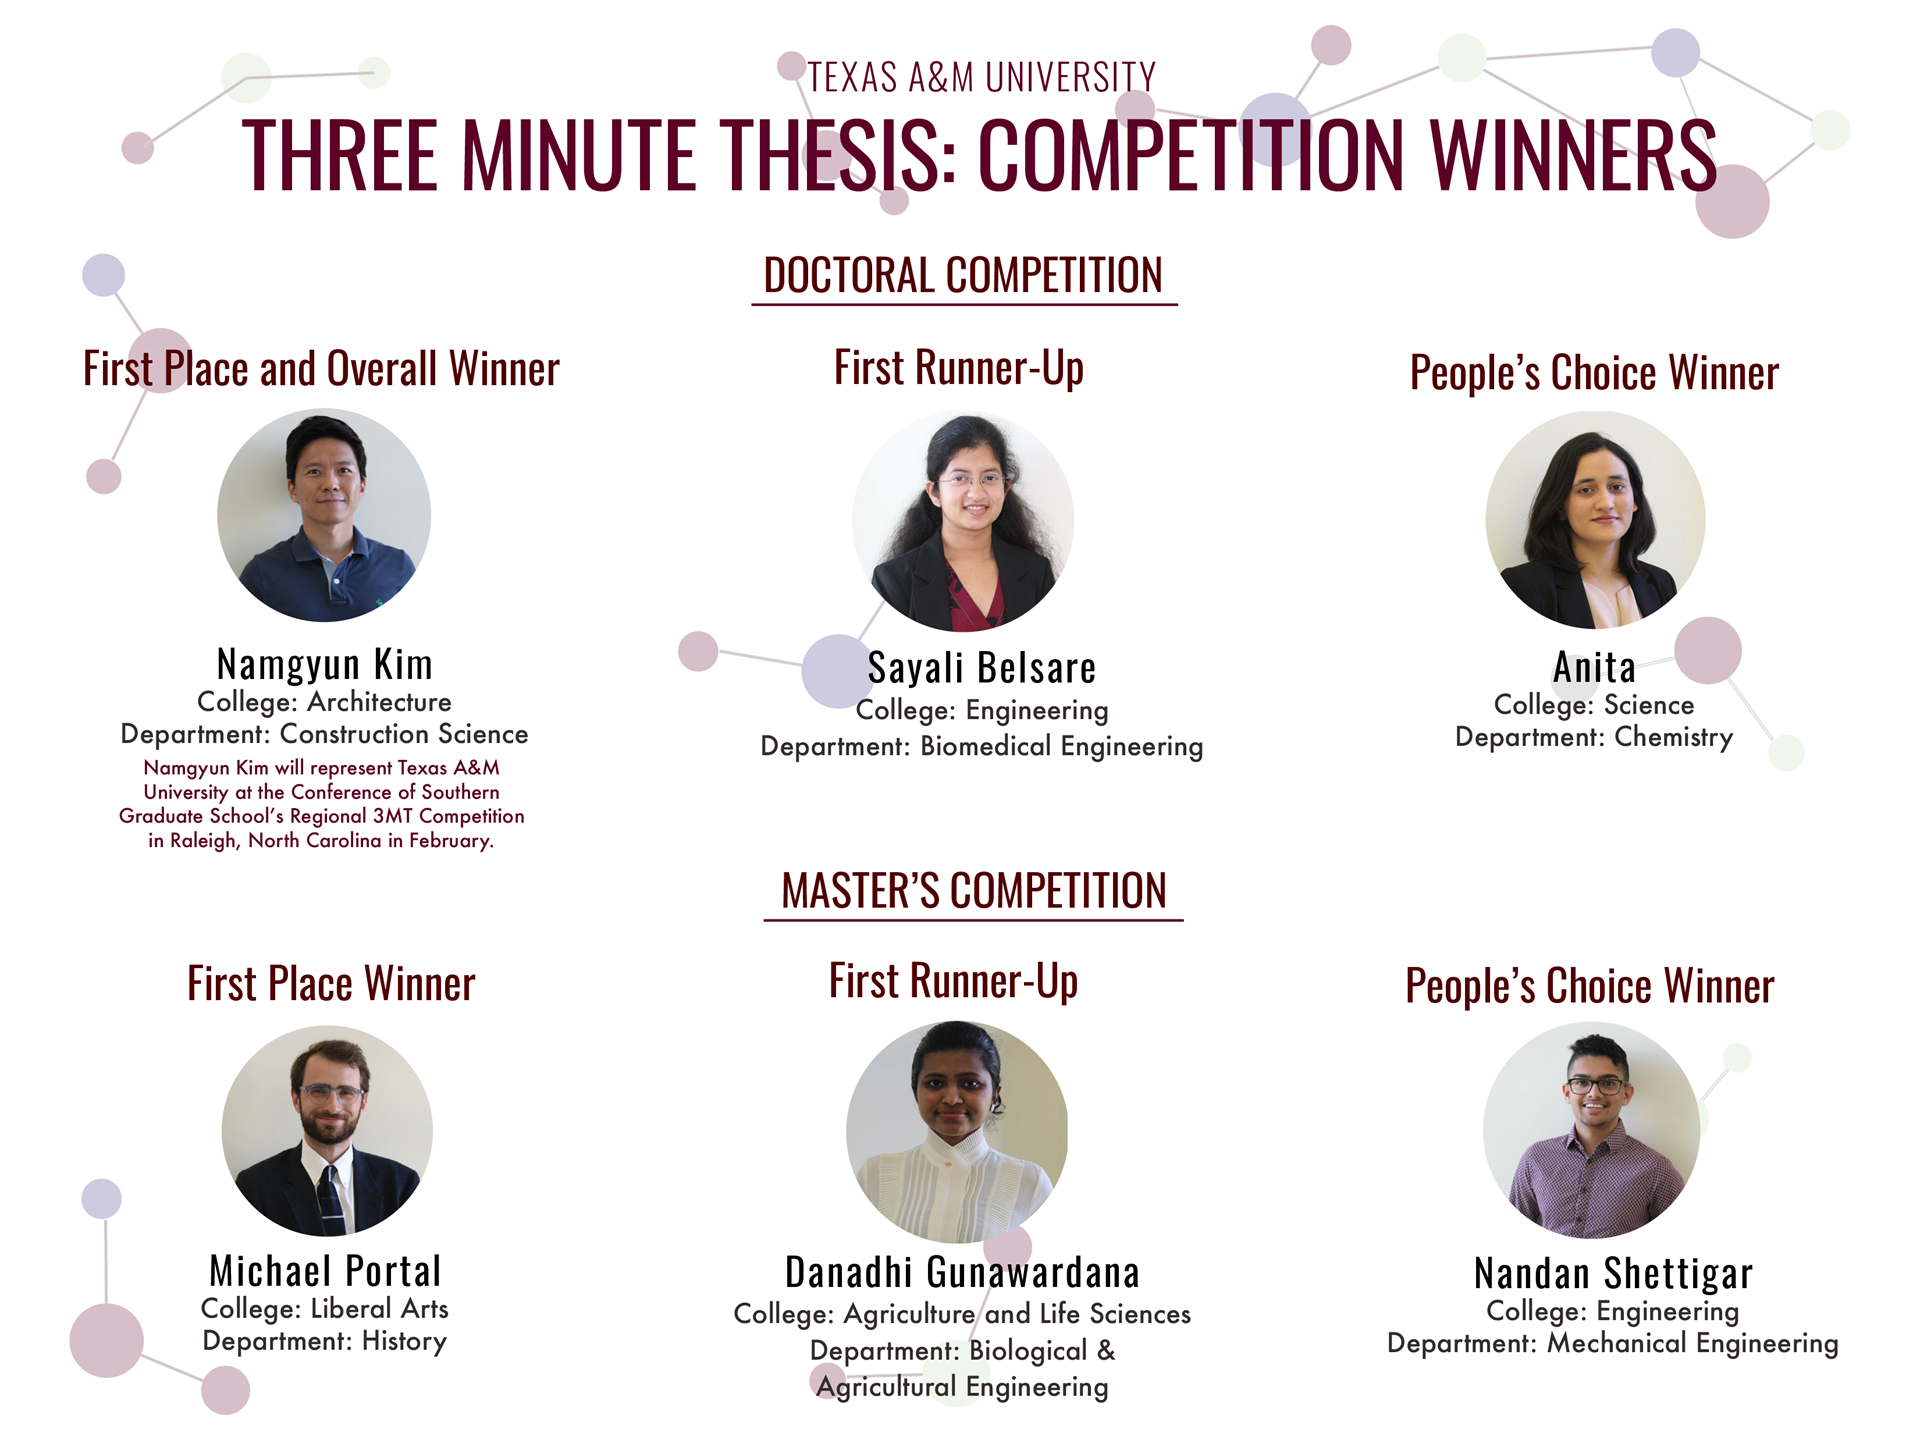 College of Architecture's Namgyun Kim Wins the 2021-2022 Three Minute Thesis Competition Finals teaser image